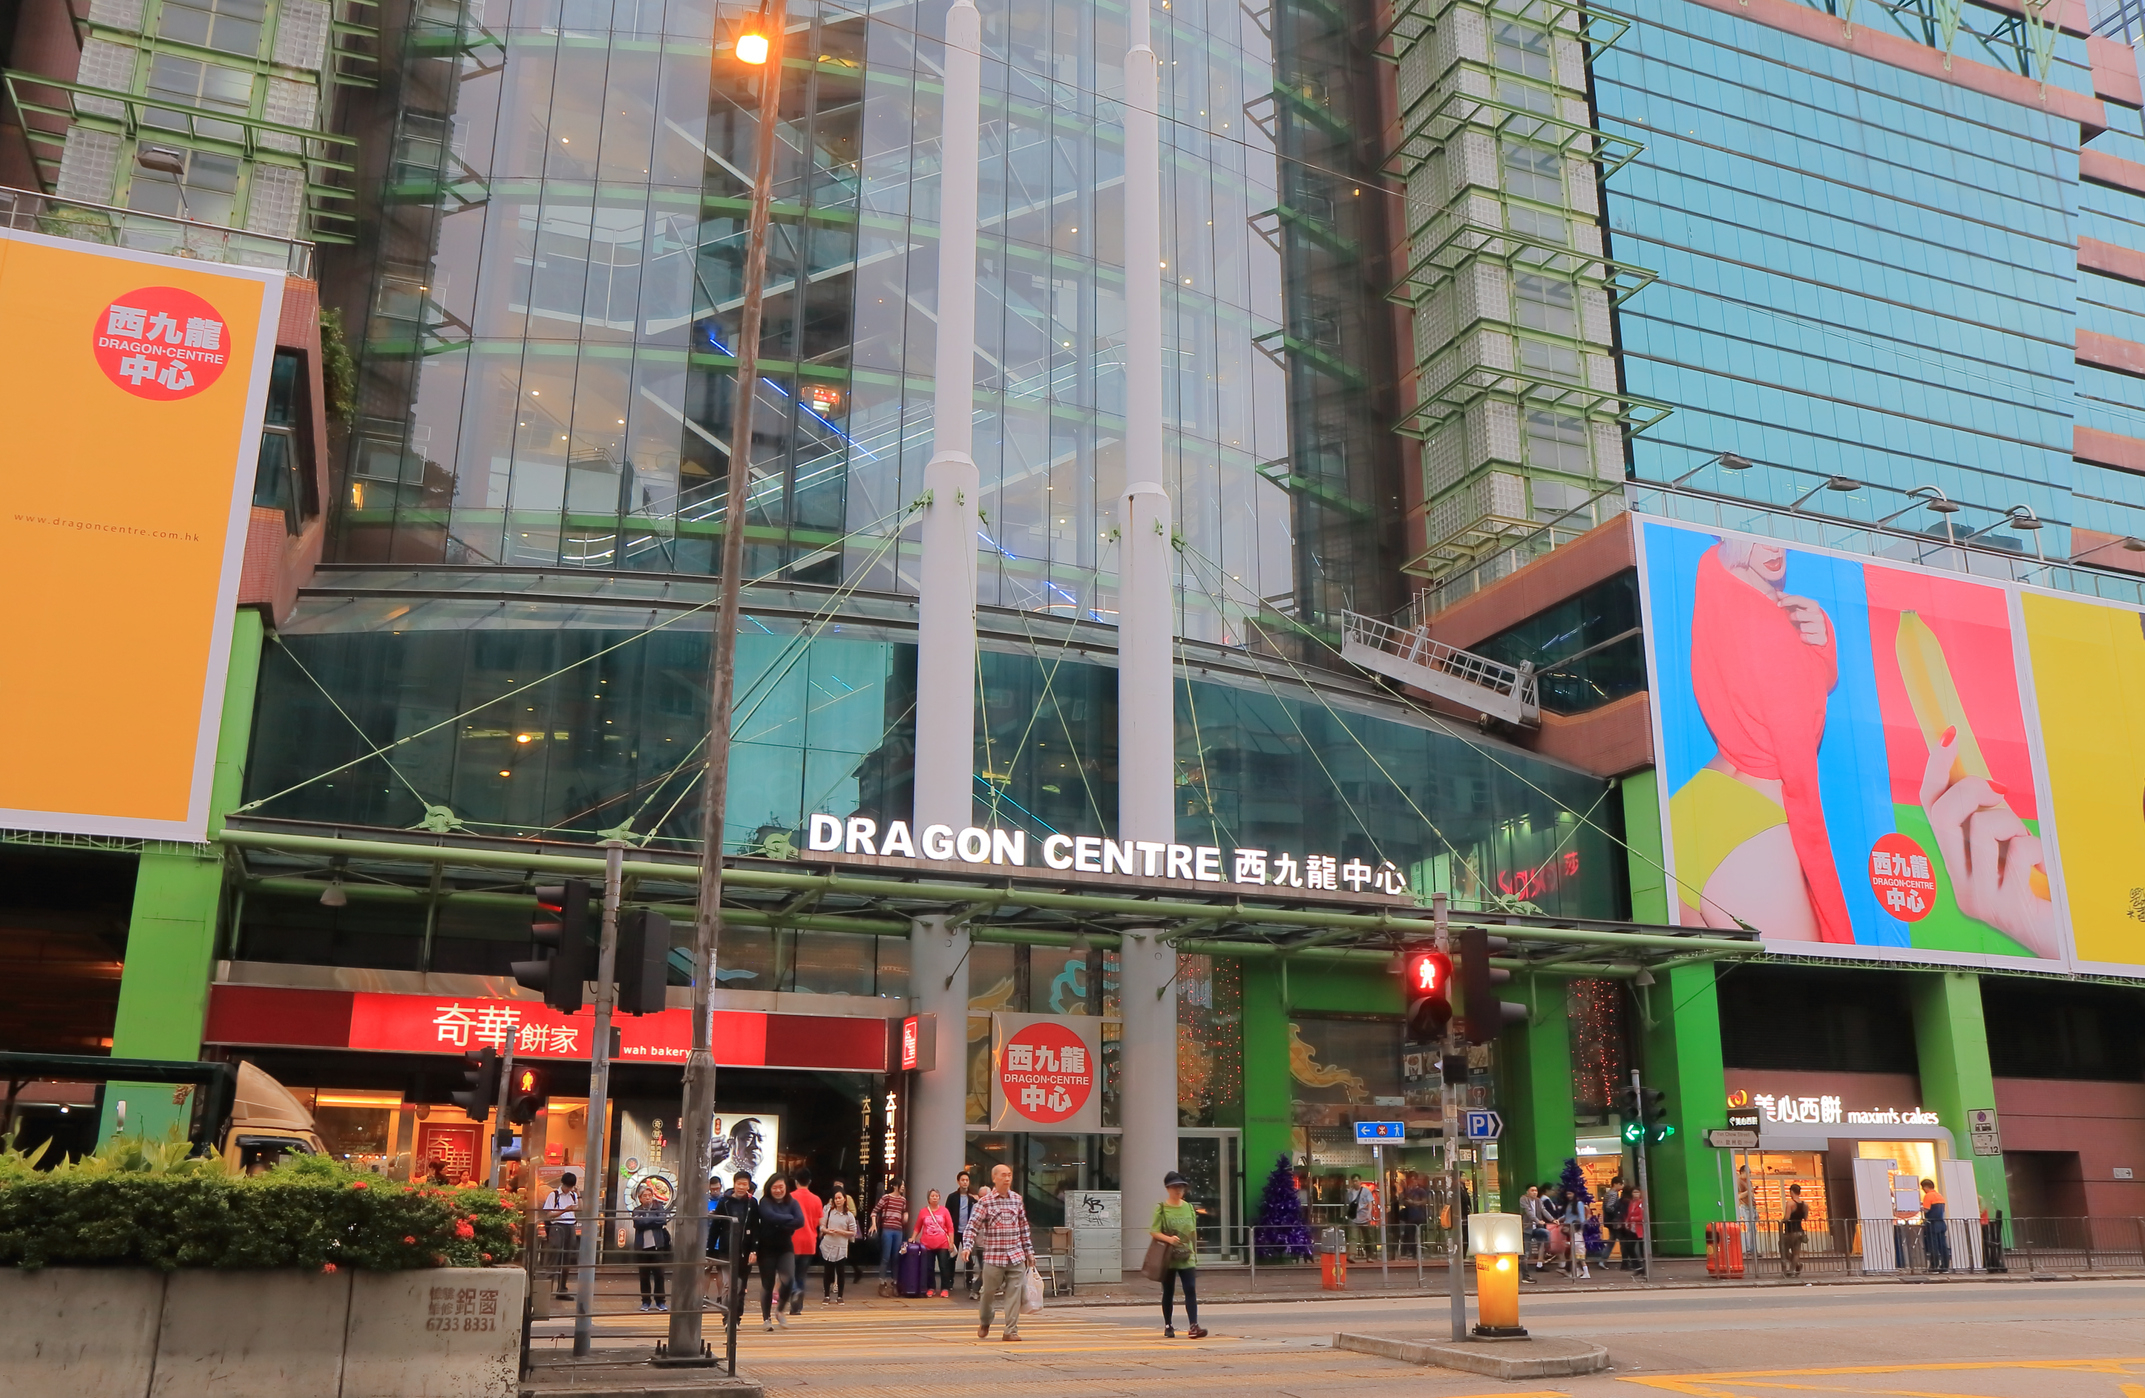 Entrance of Dragon Centre mall in an urban setting with pedestrians and signage